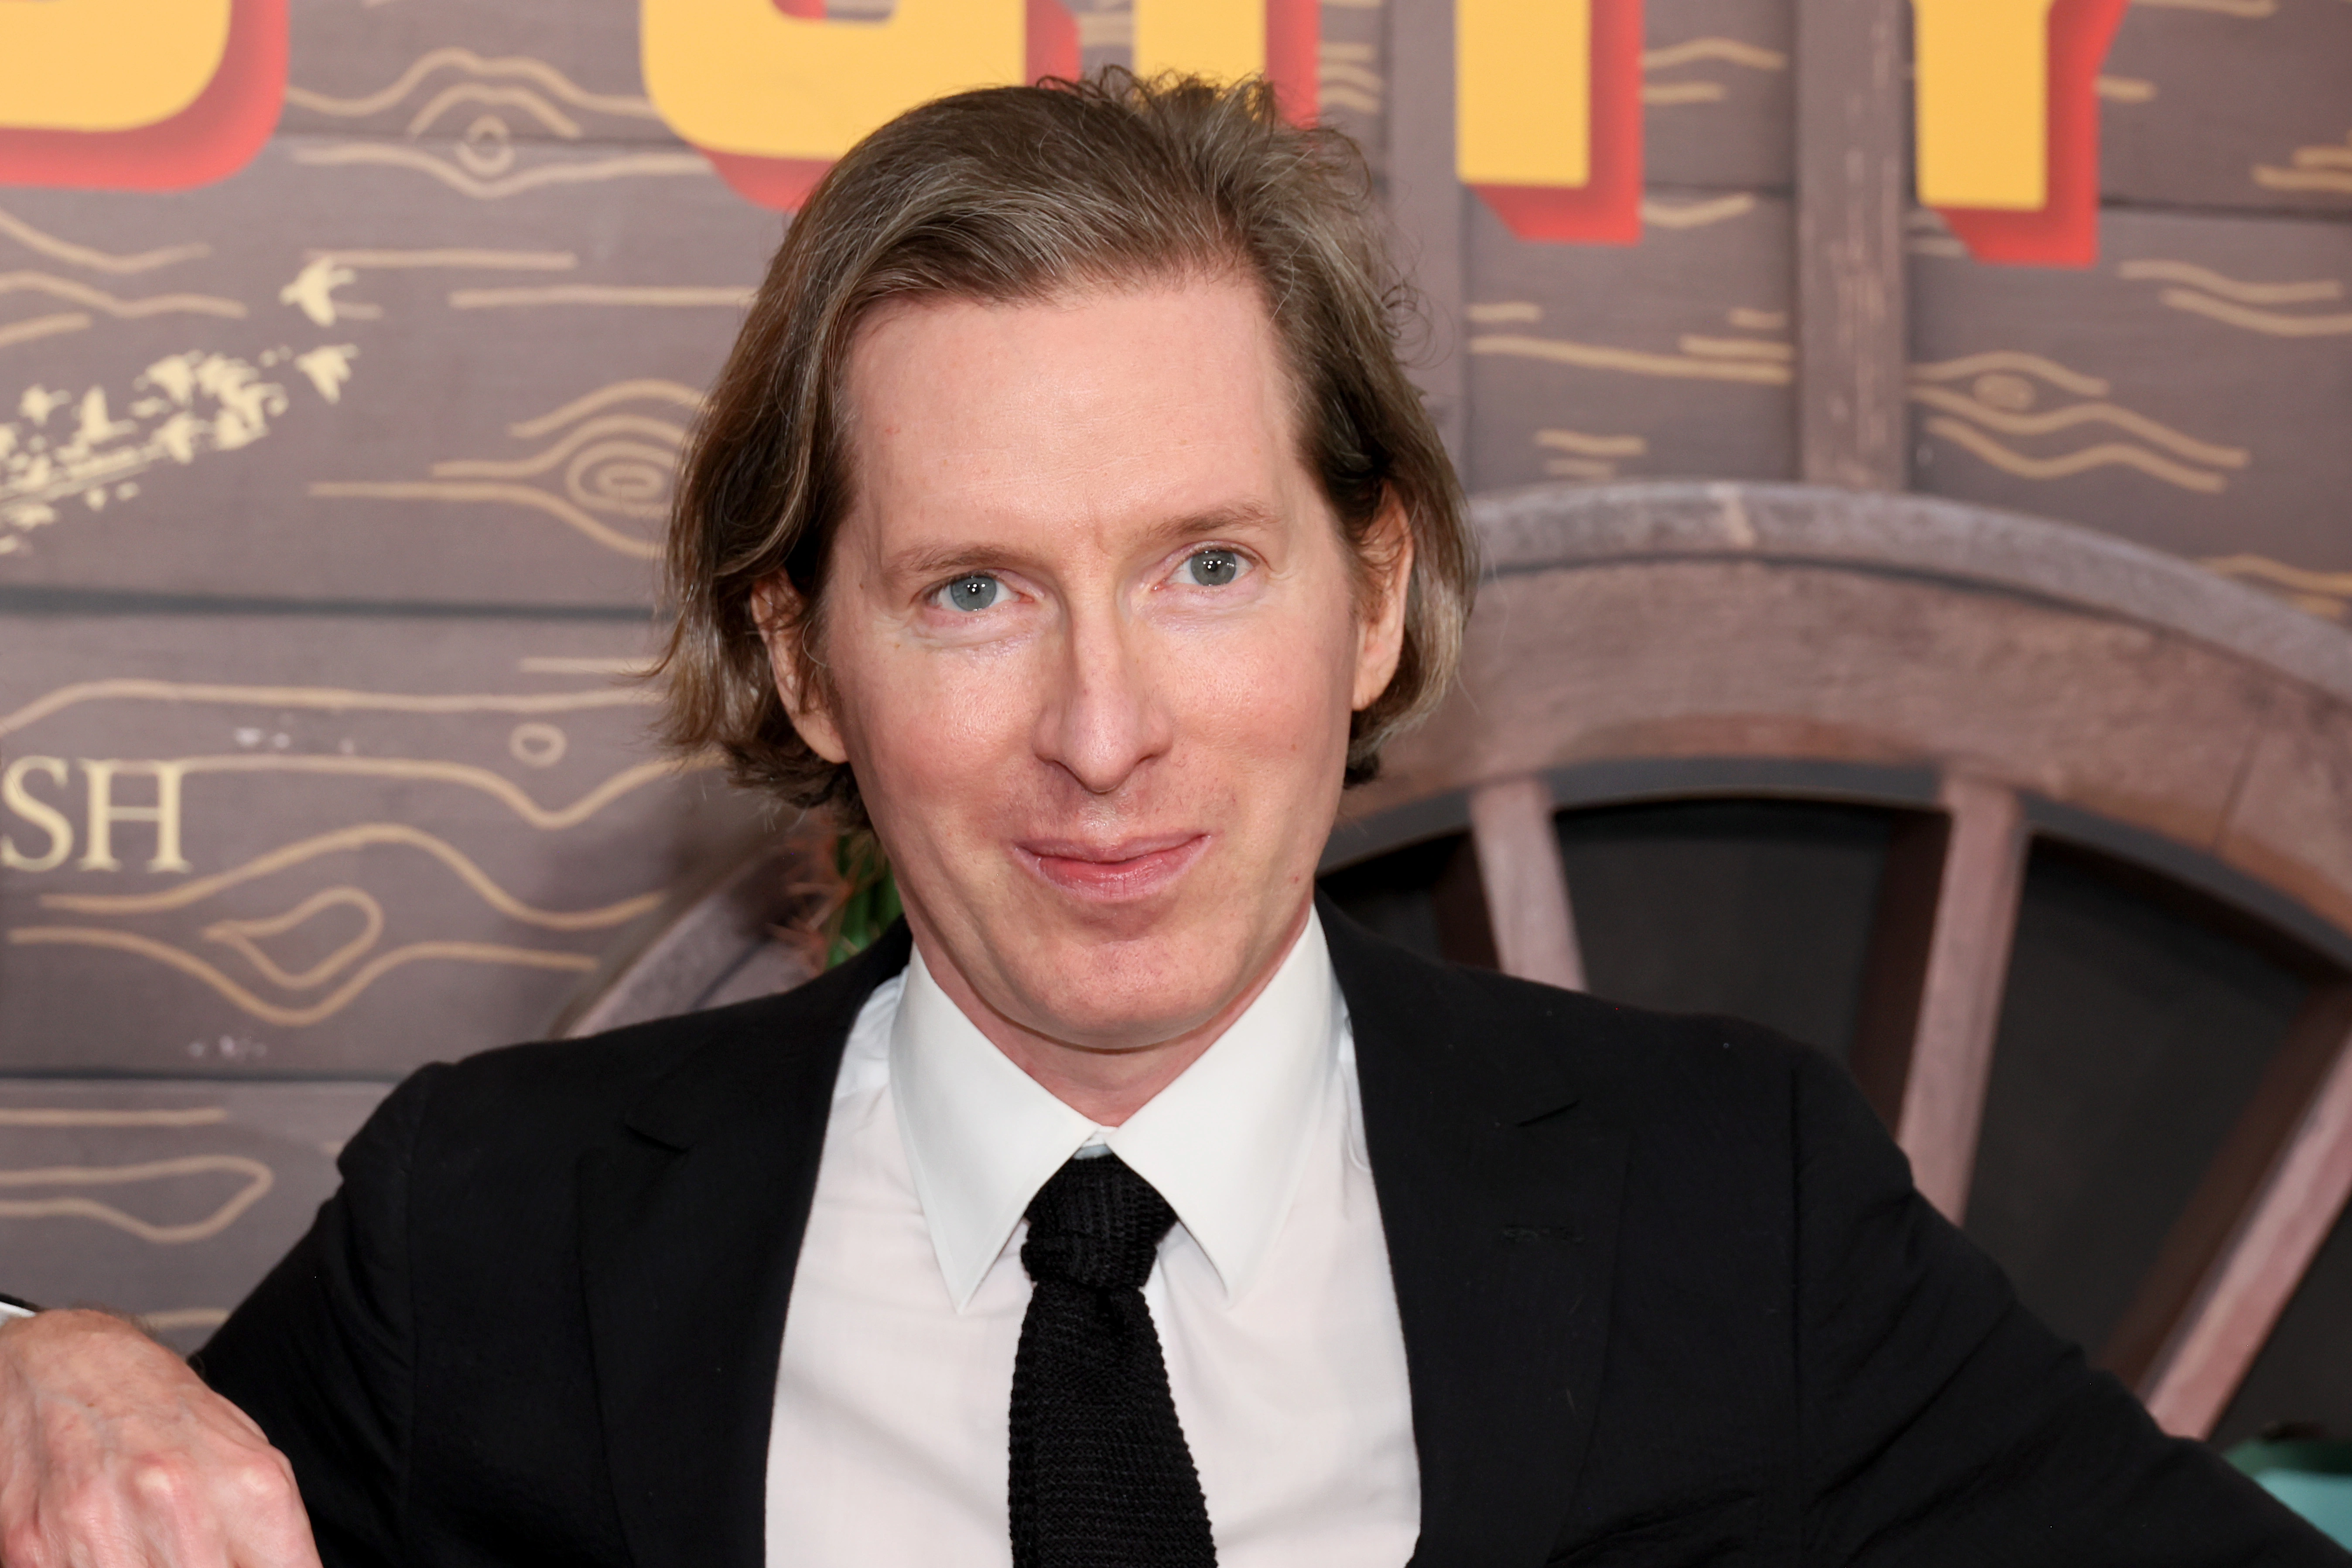 The Wonderful Story of Henry Sugar Runtime Revealed for Wes Anderson Netflix Movie